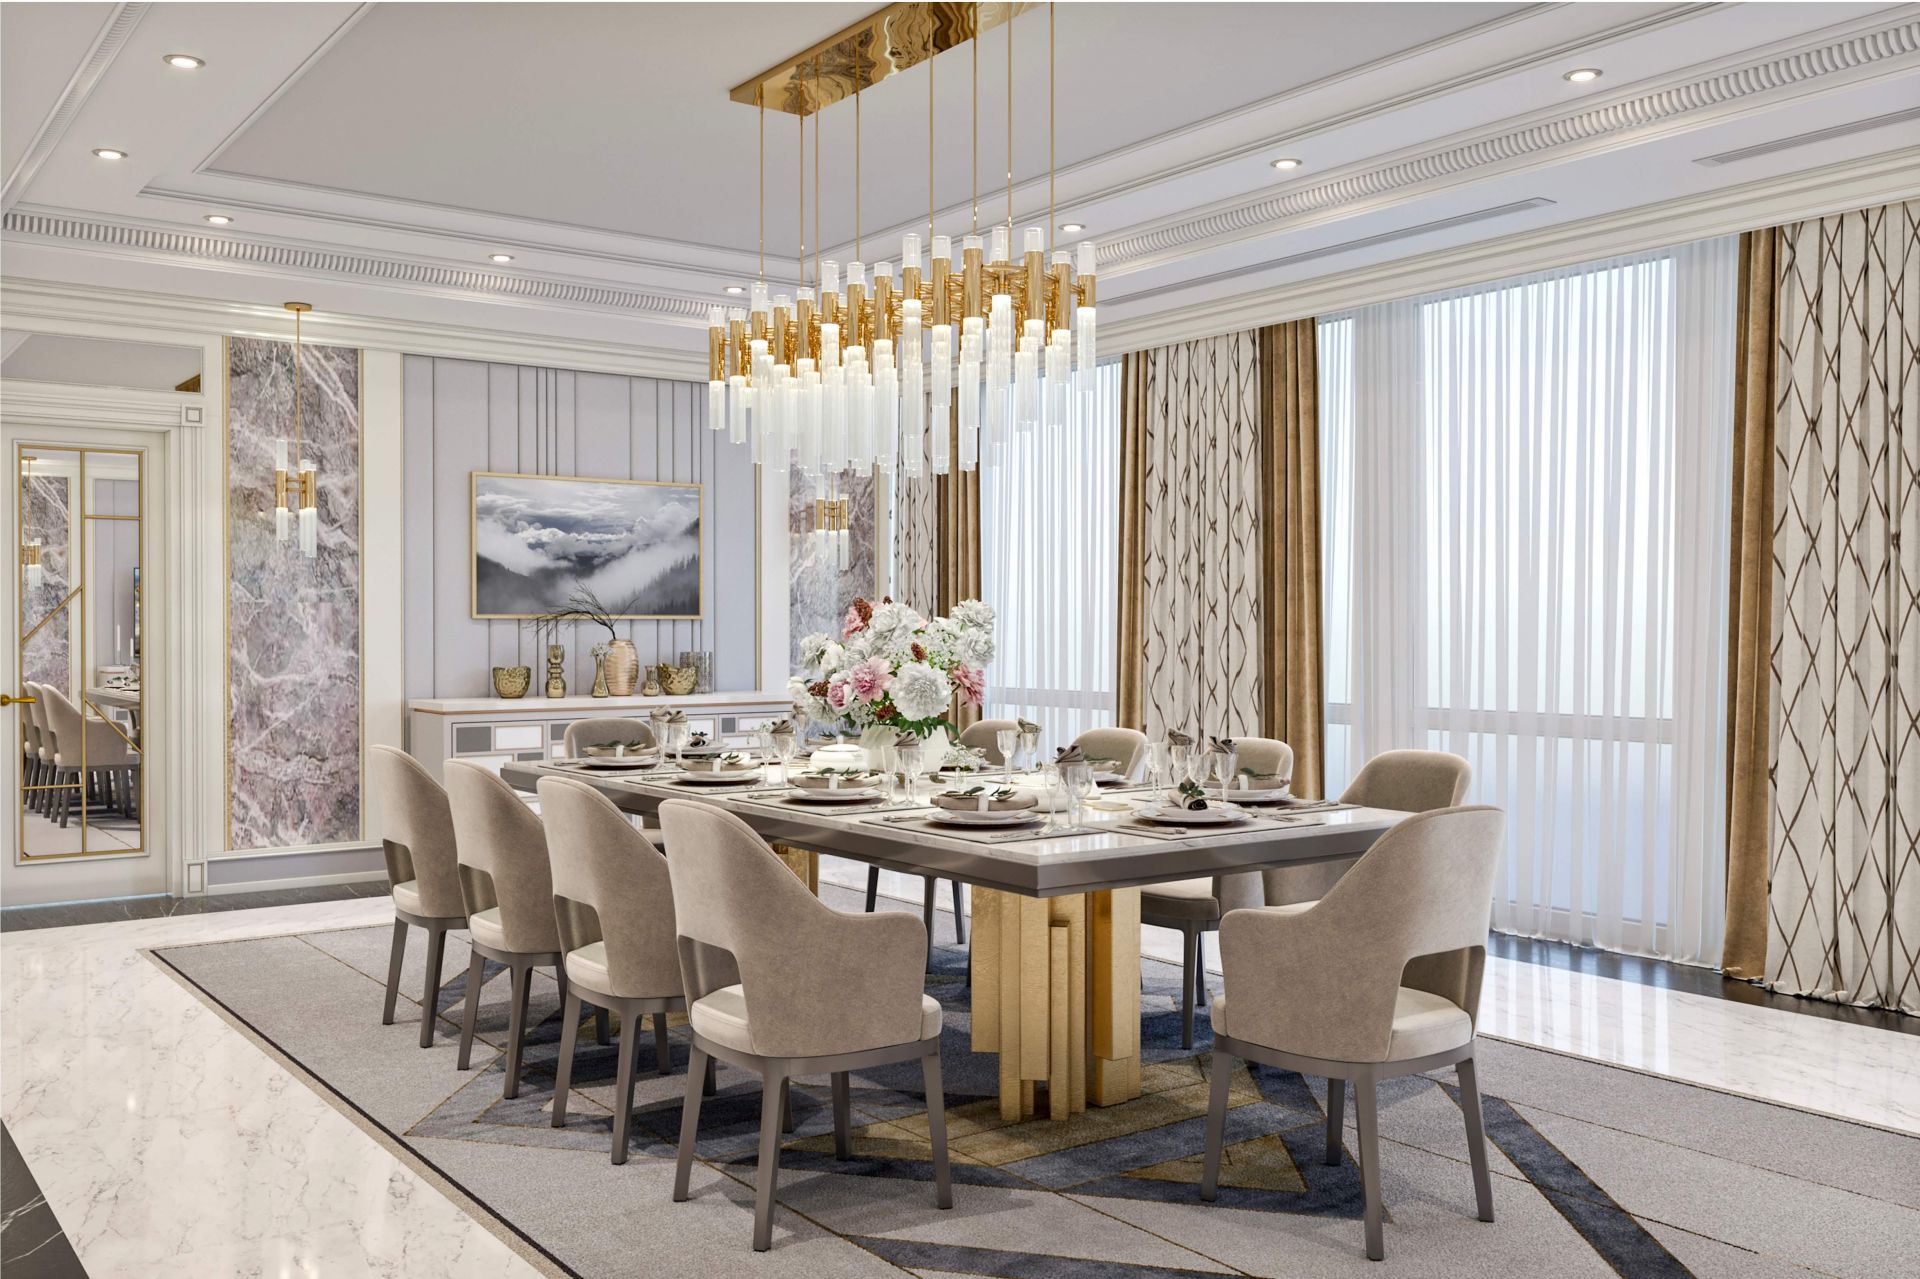 Design project of the living-dining room in the Hilton Hotel